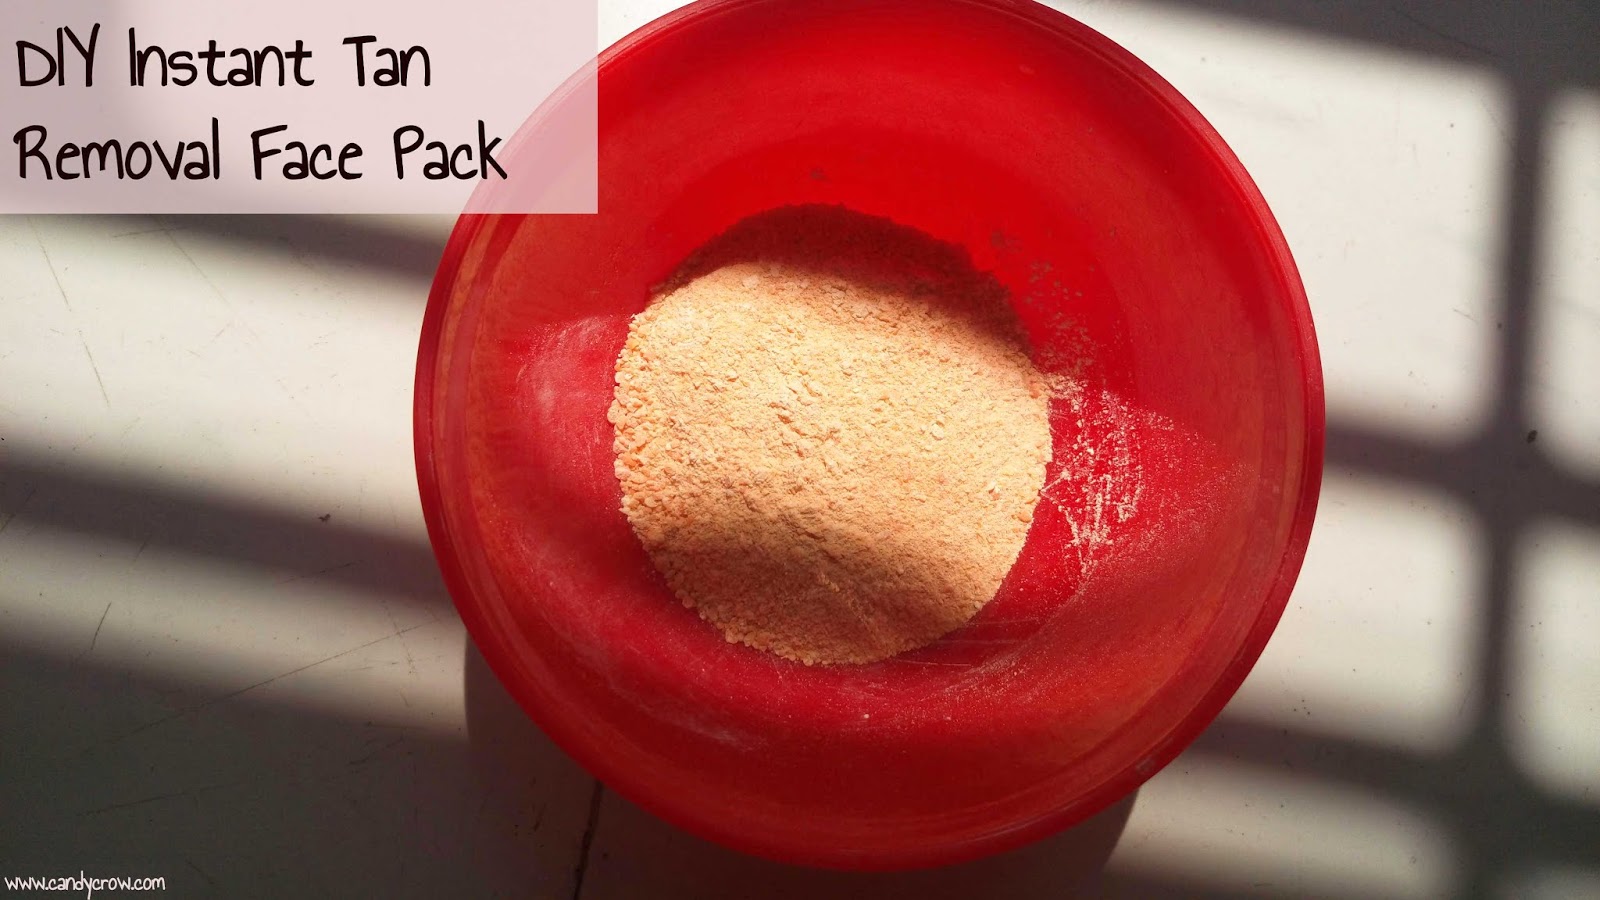 DIY Instant Tan Removal Face Pack